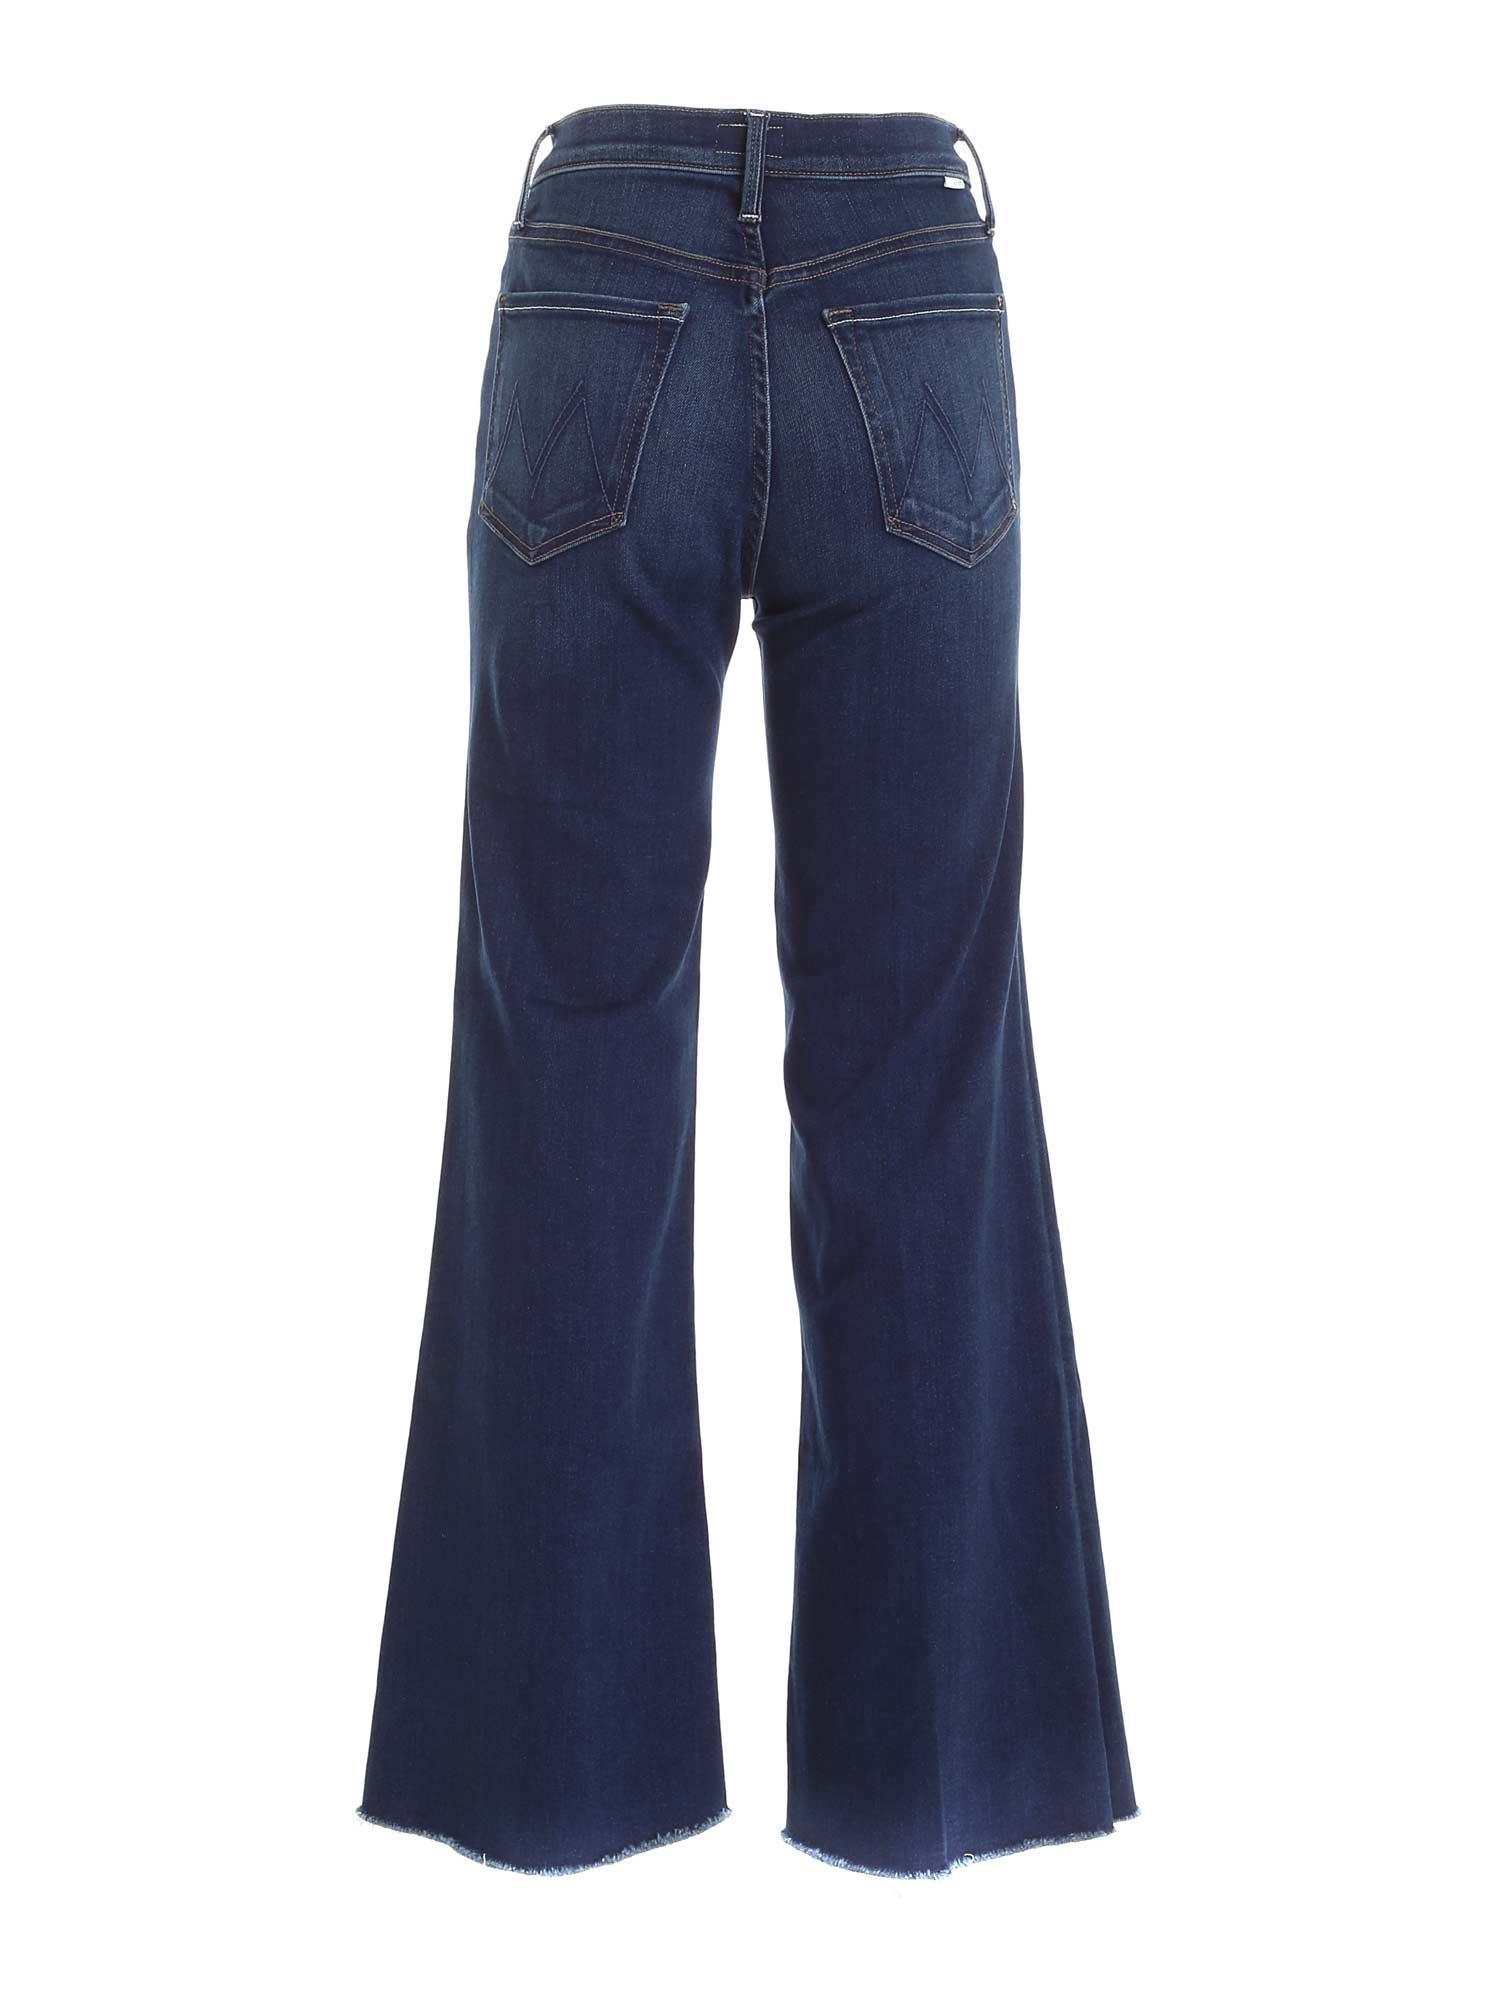 Mother Denim The Tomcat Roller Fray Jeans in Blue - Lyst